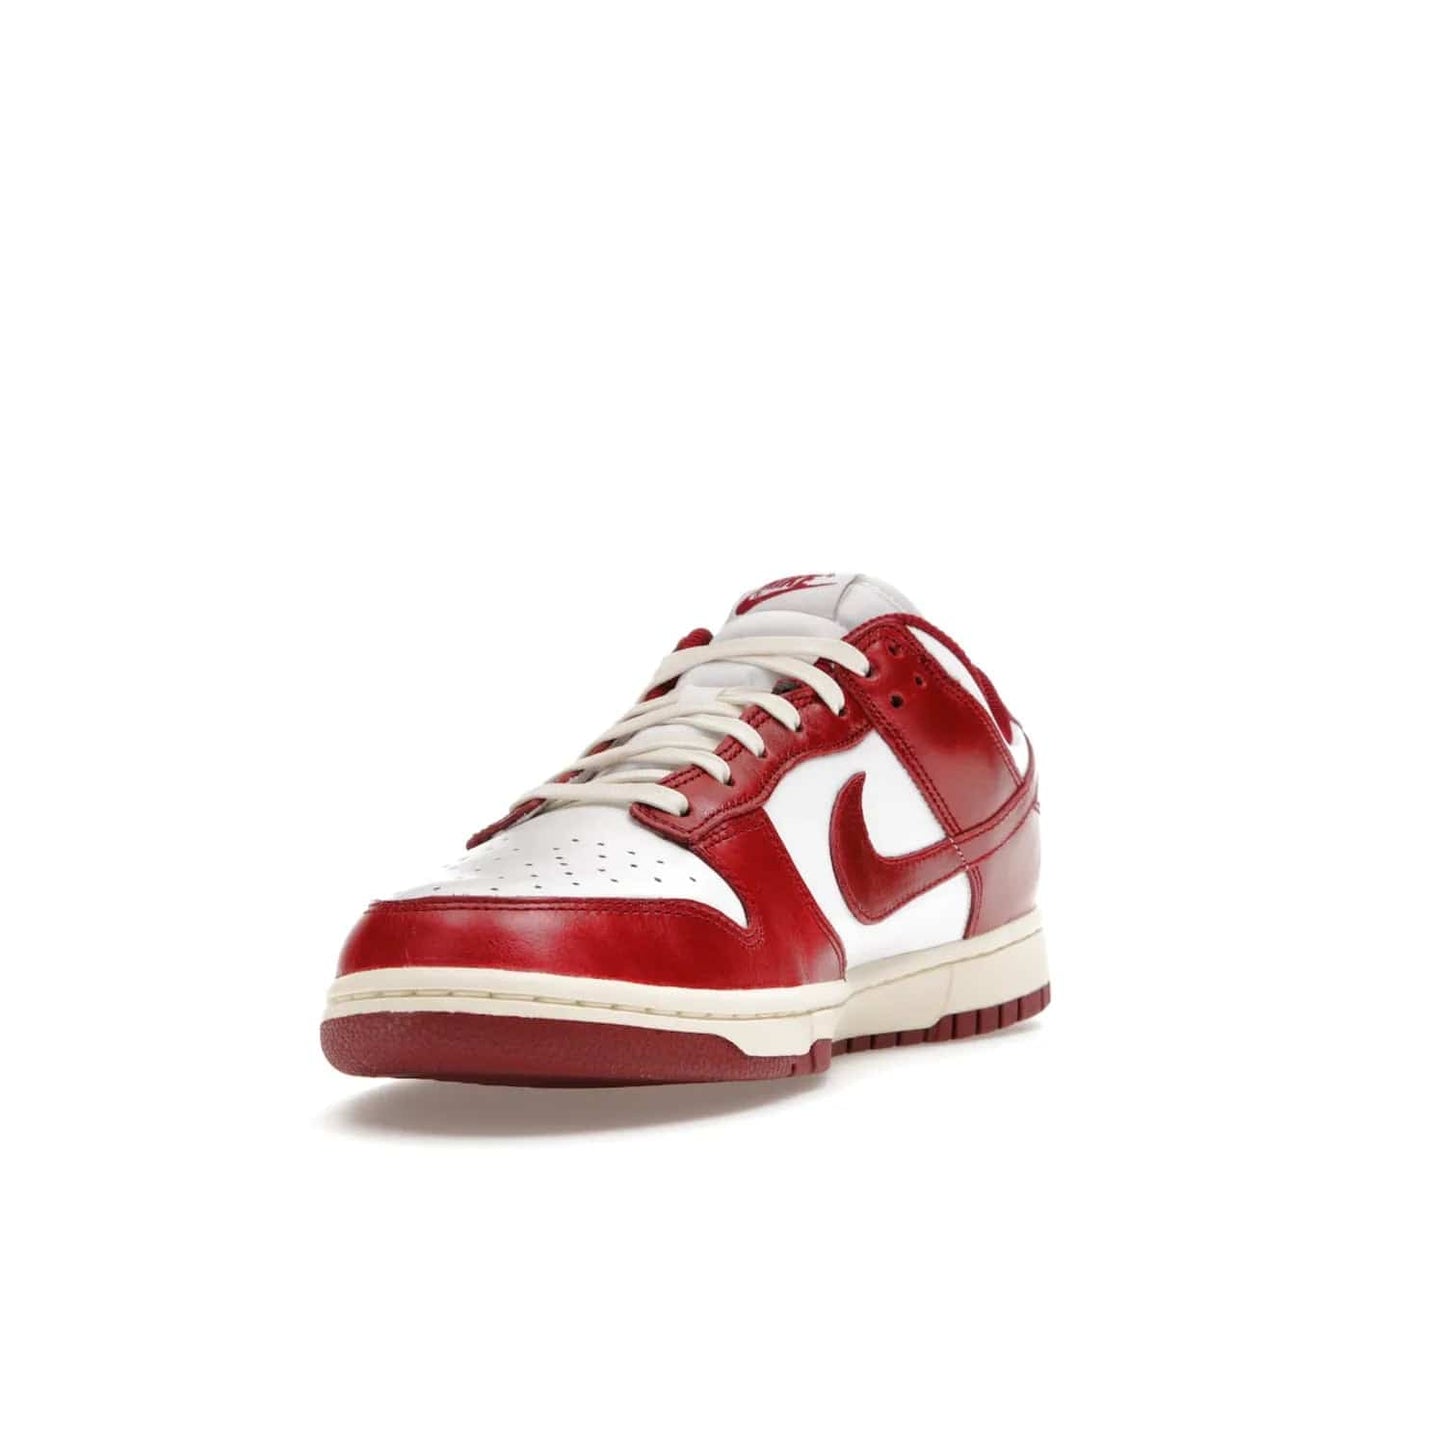 Nike Dunk Low PRM Vintage Team Red (Women's) - Image 13 - Only at www.BallersClubKickz.com - Shop the stylish Nike Dunk Low PRM Vintage Team Red. Signature Red and White leather with Coconut Milk midsoles for an aged finish. 21 April 2023 release.